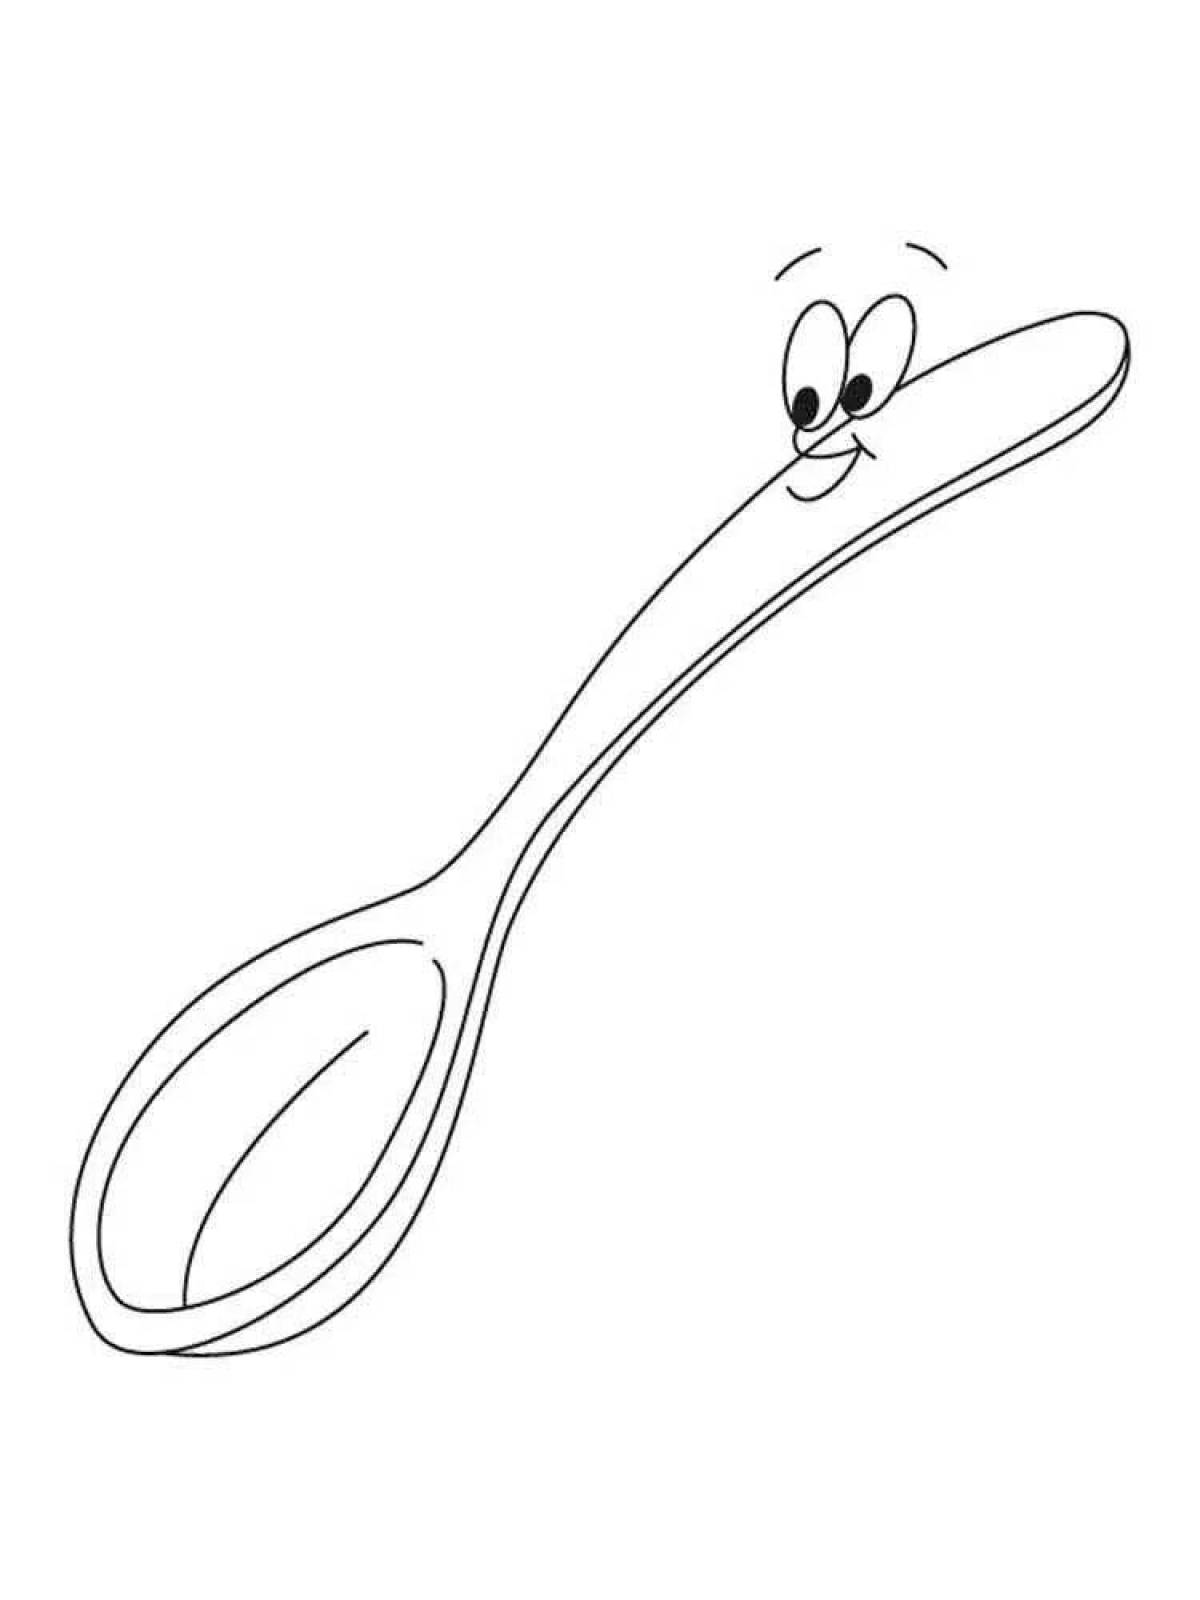 Fun coloring of a spoon for children